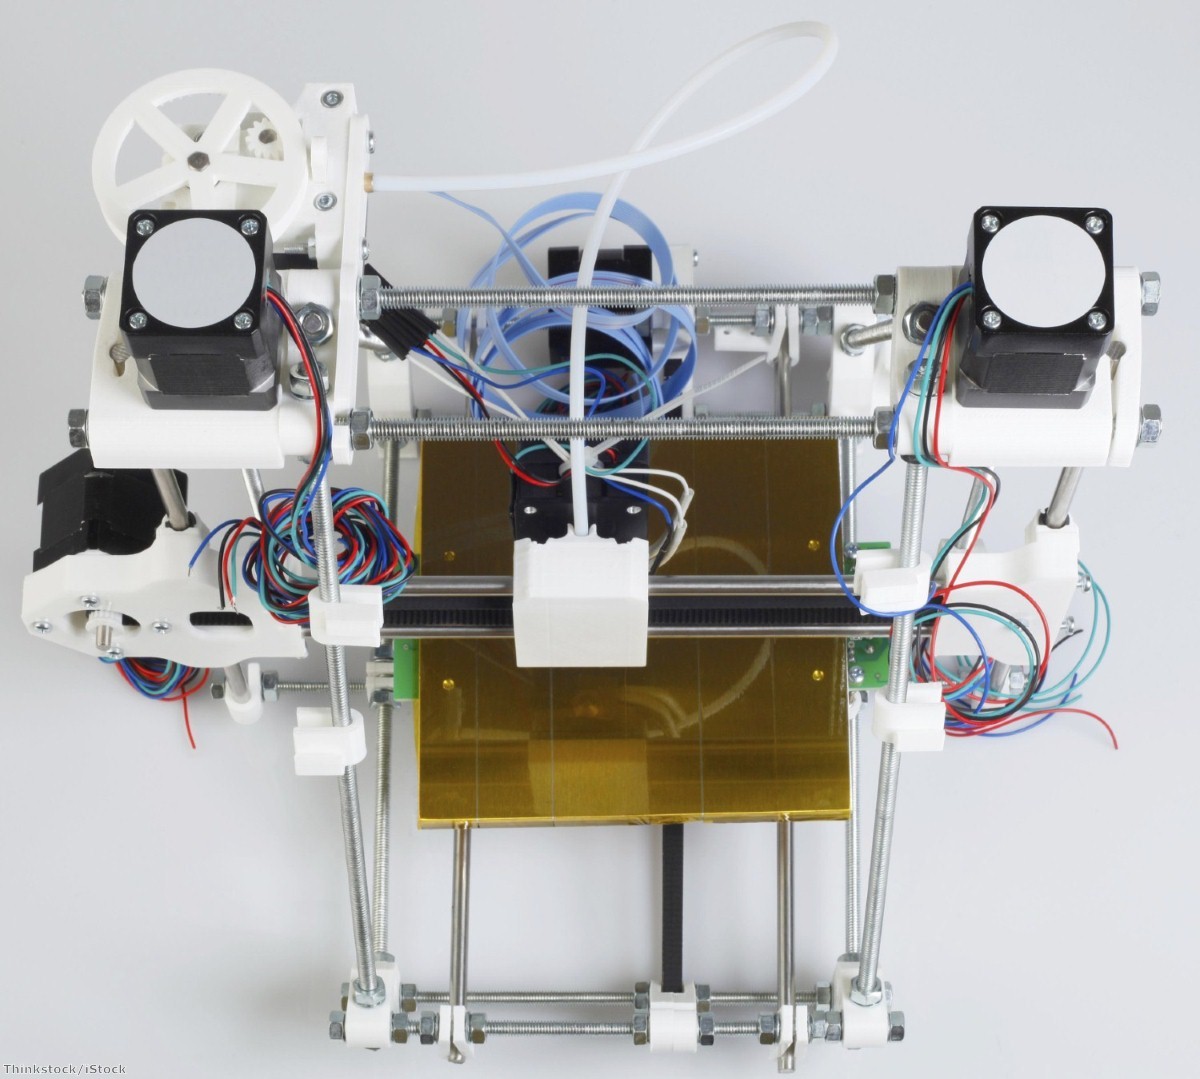 A 3D printer makes many innovations in design possible